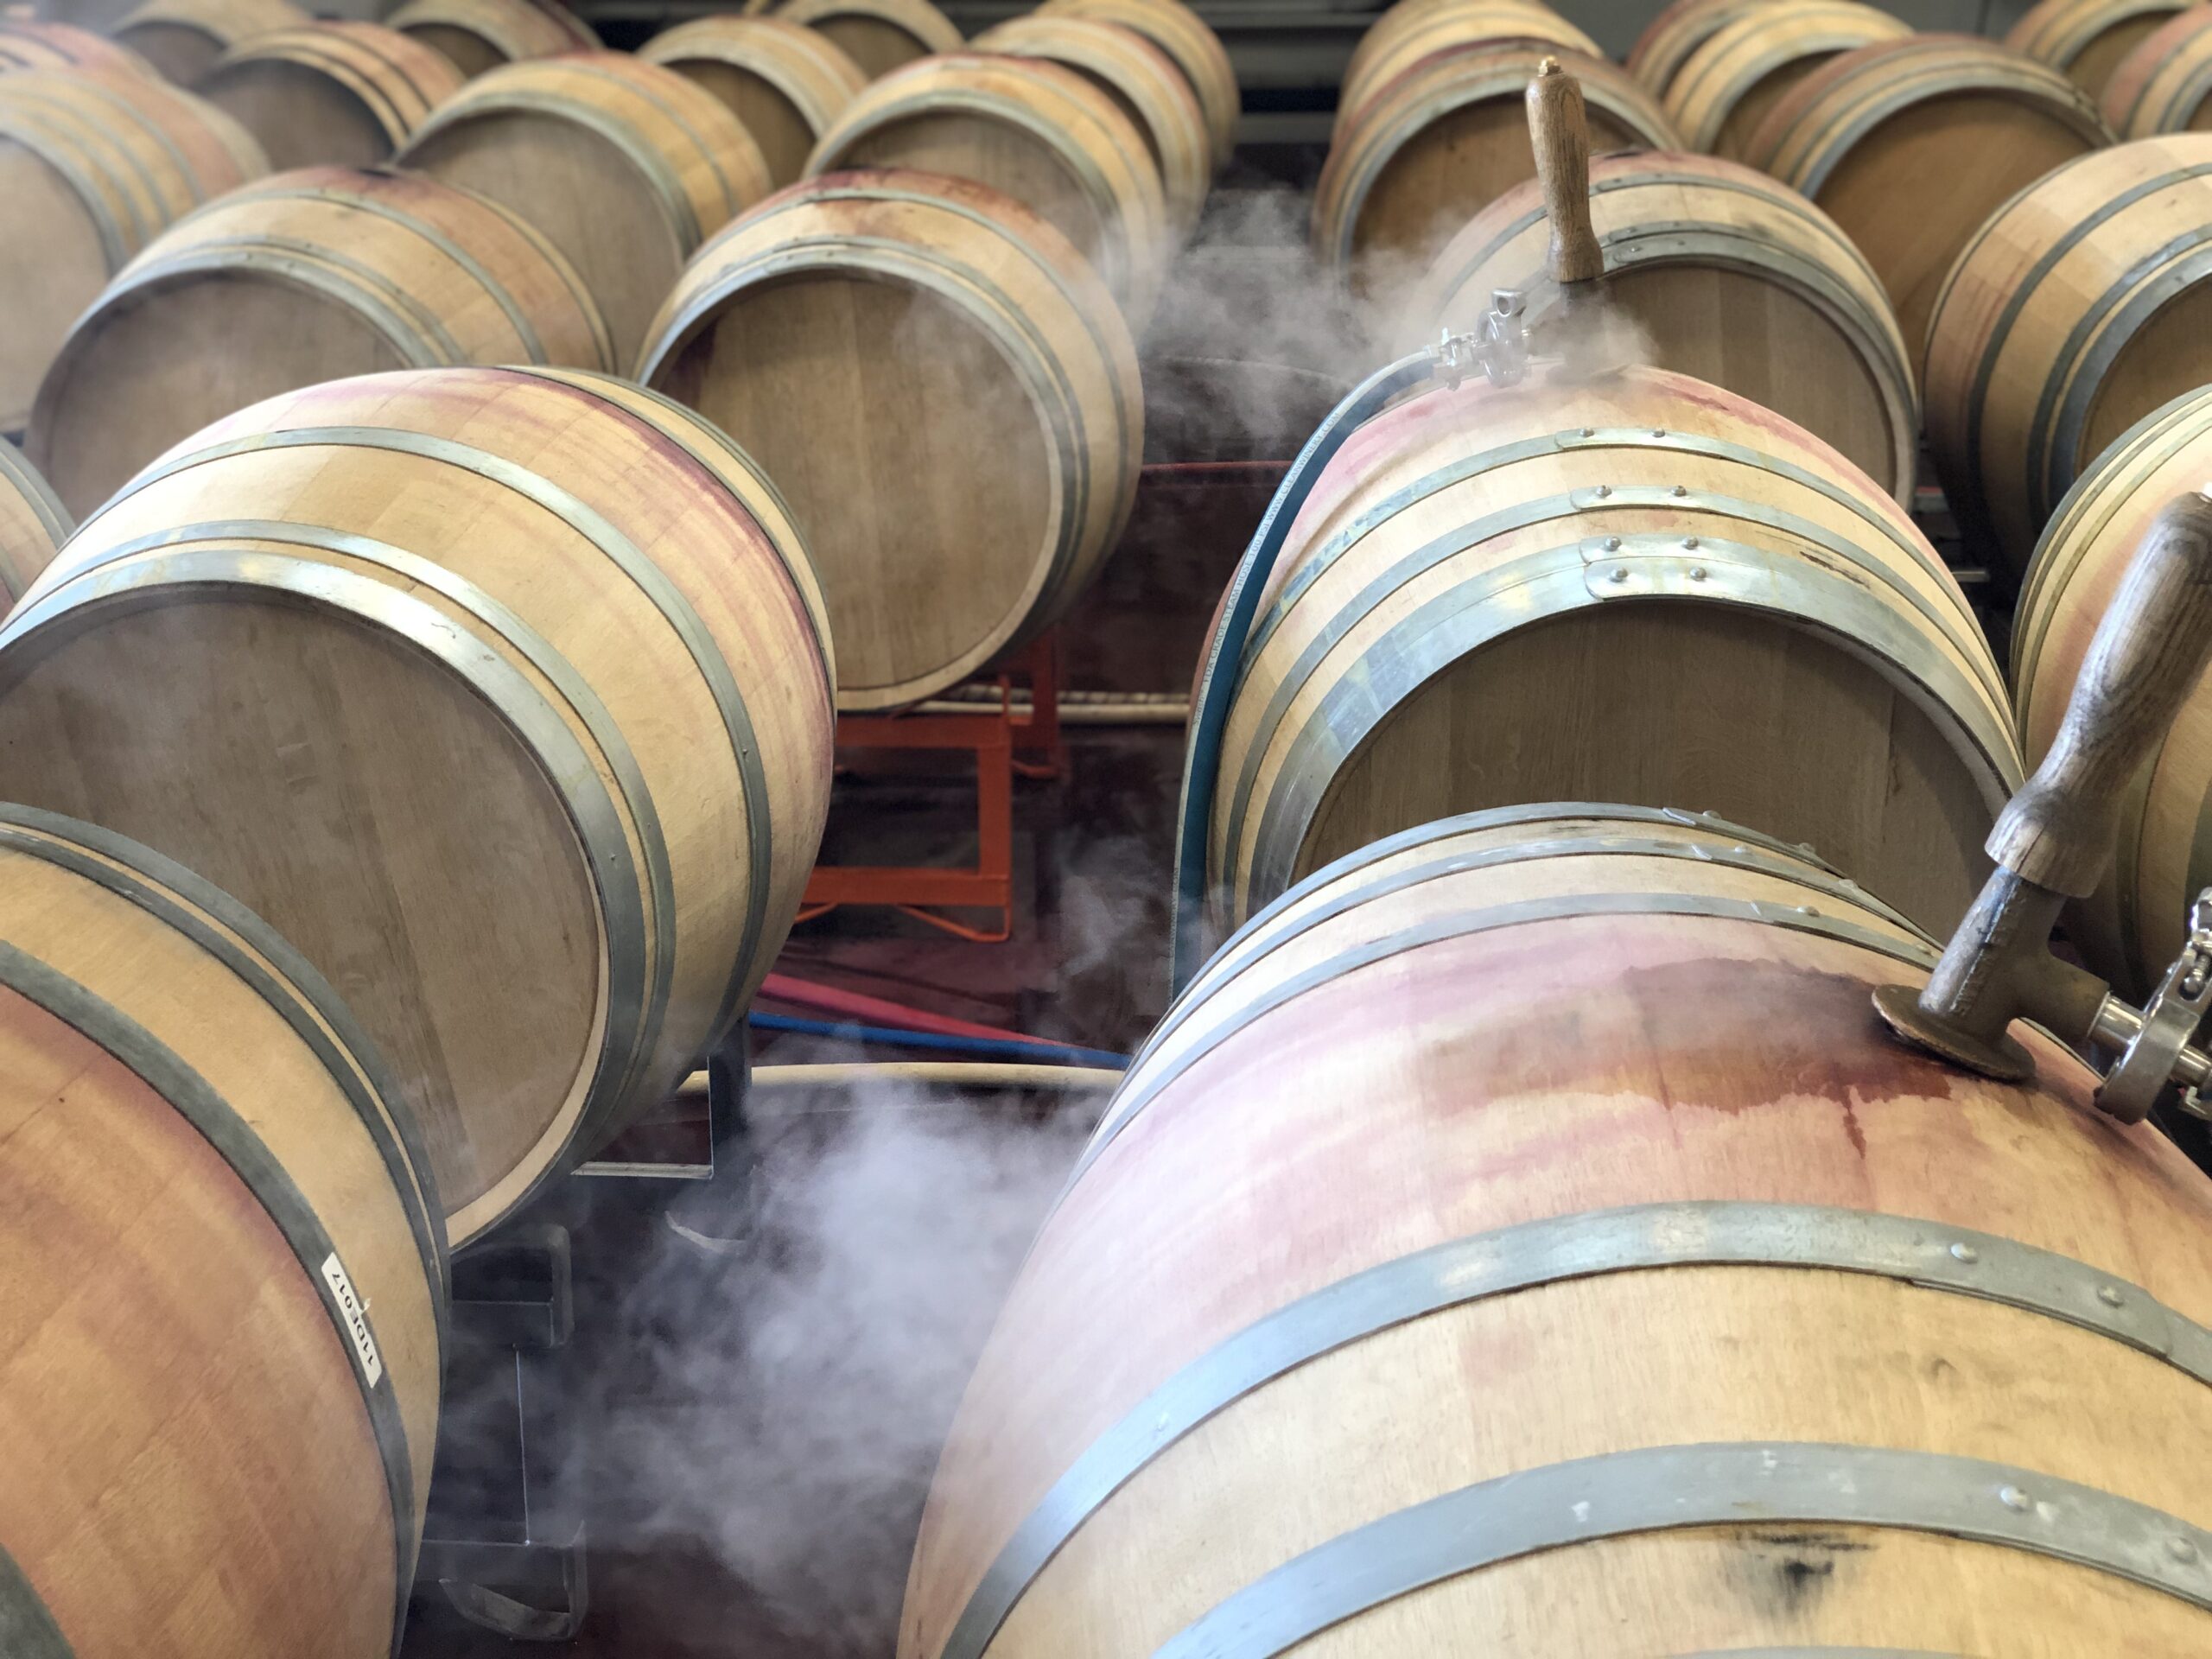 Rows of barrels being steamed in the winery